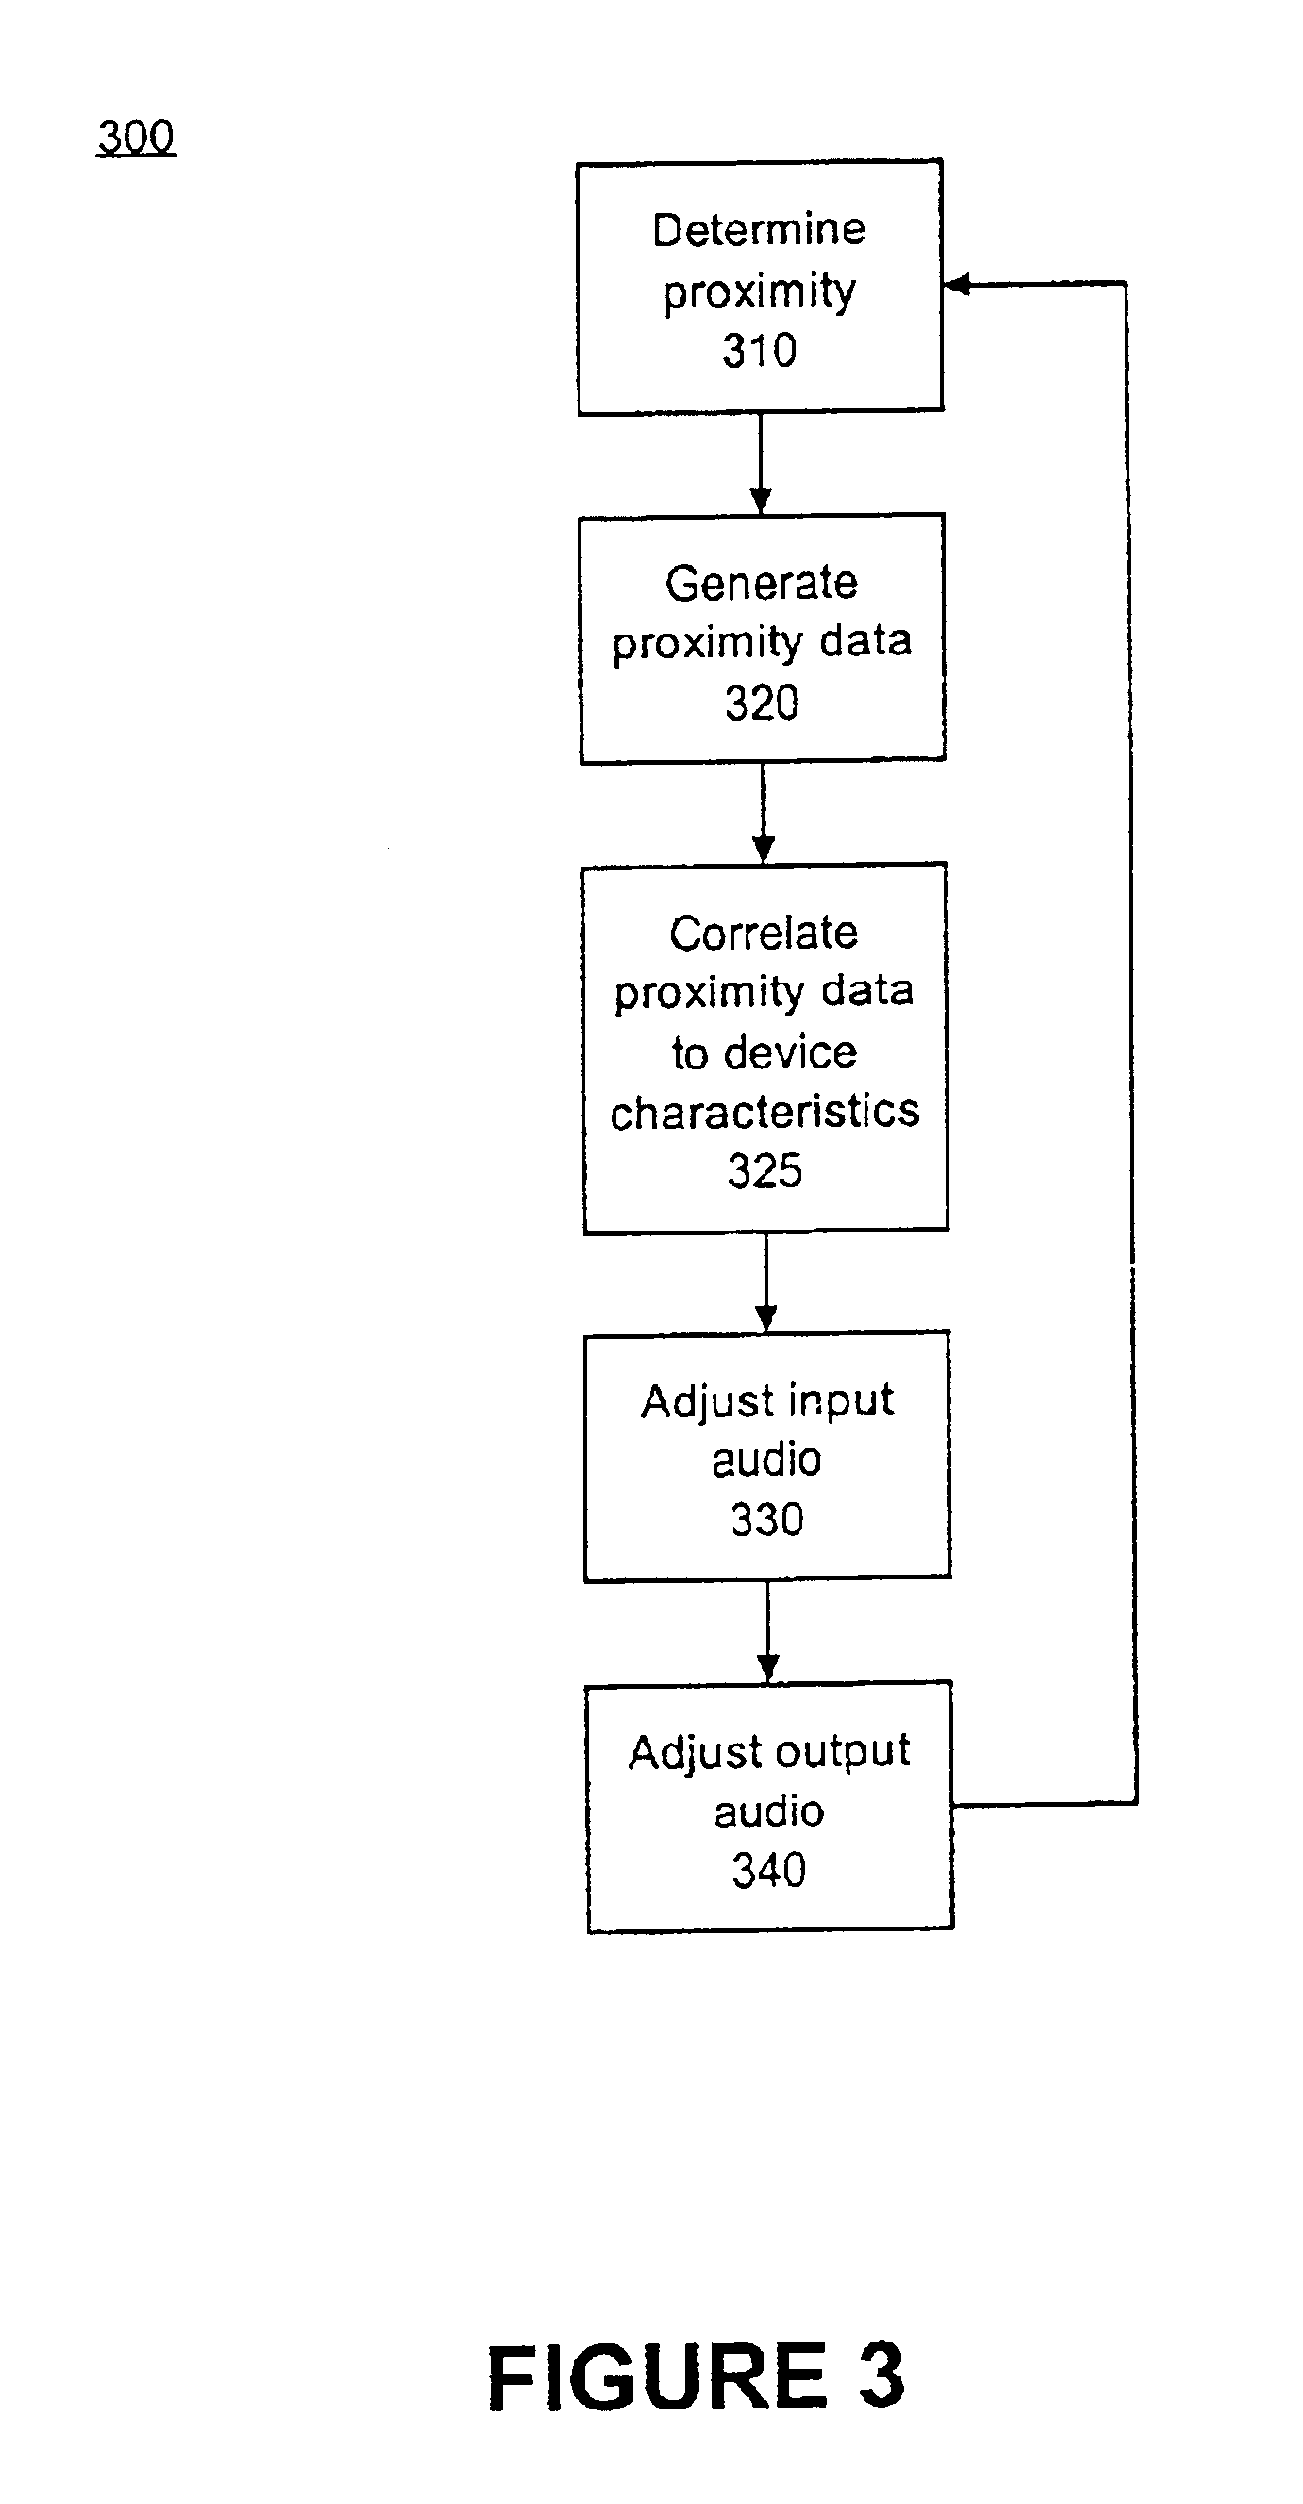 Audio source position detection and audio adjustment